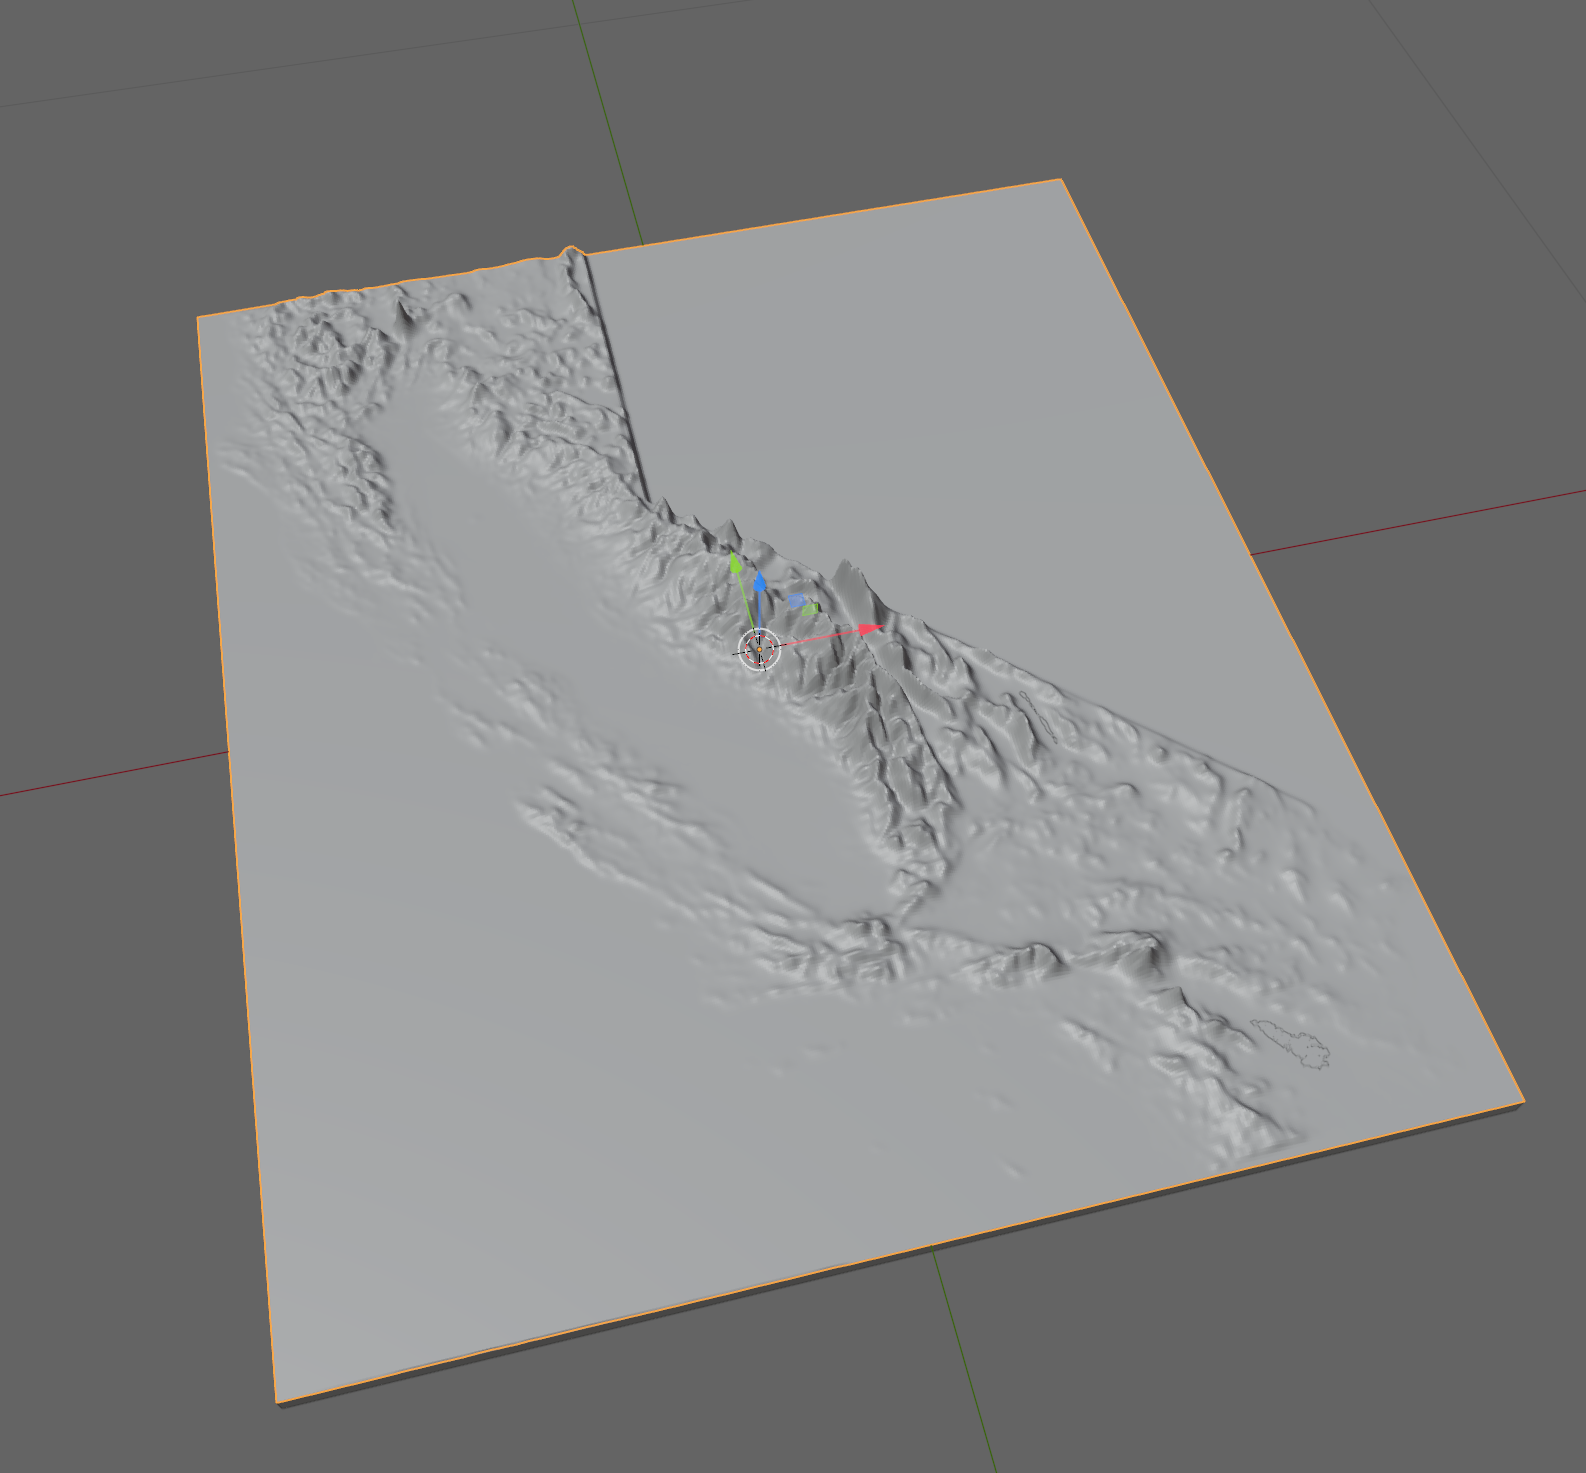 a slightly smoother mesh